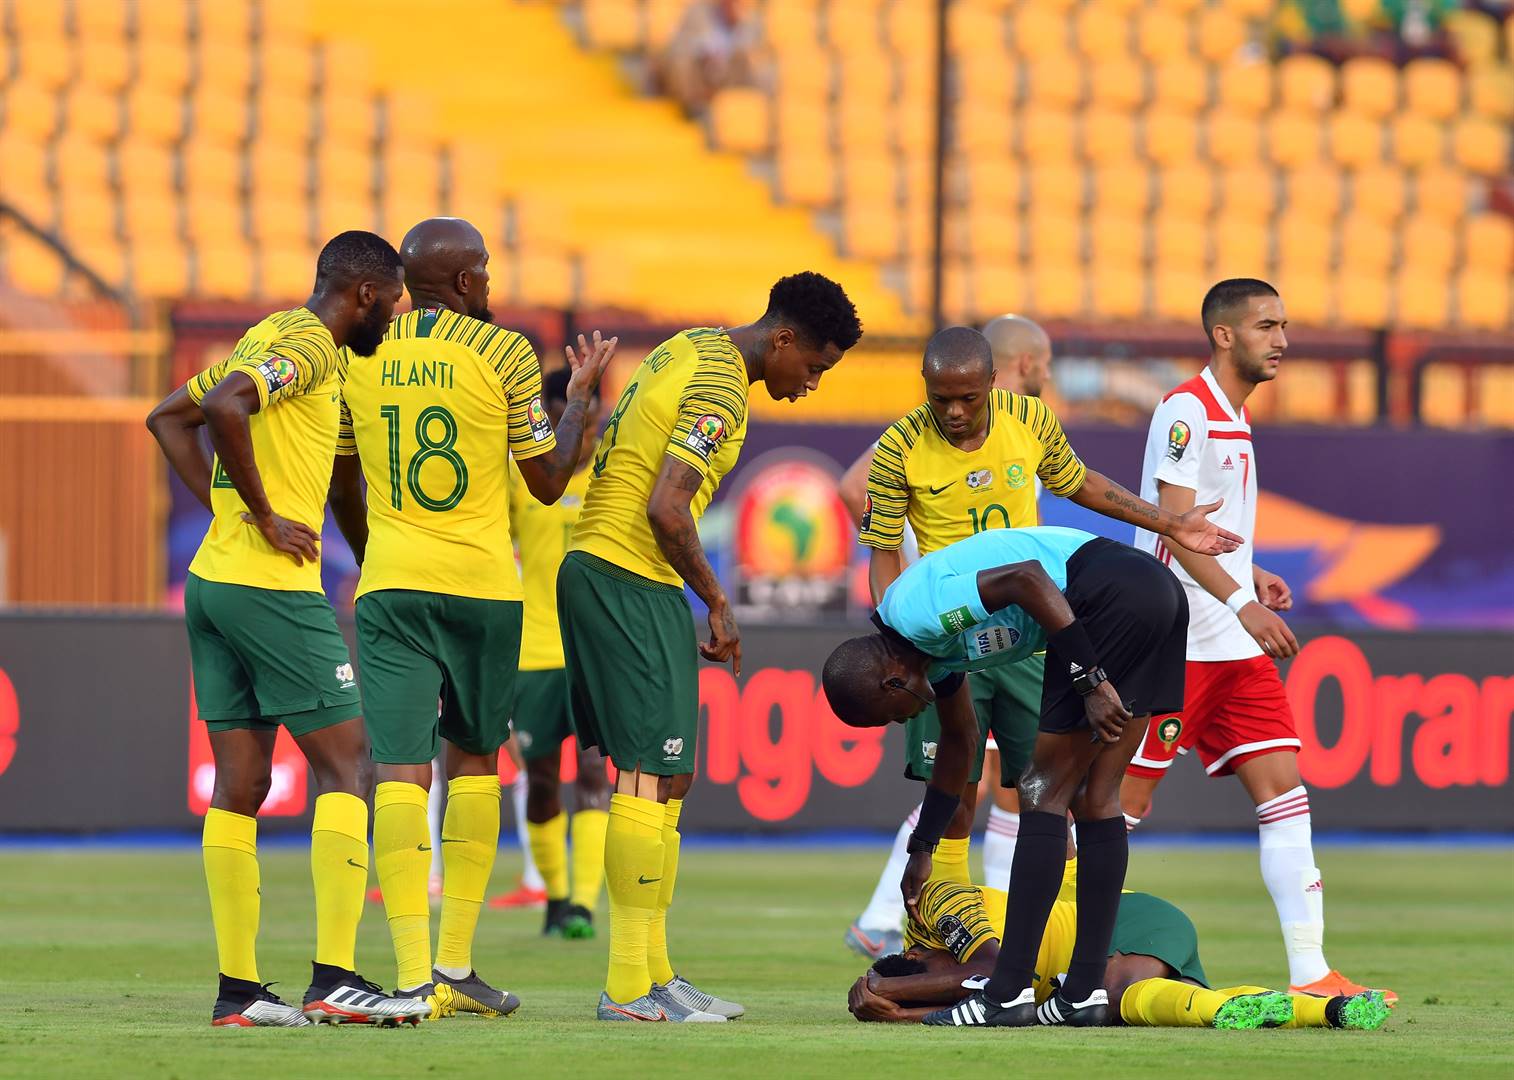 Percy Tau lies injured during the African Cup of Nations match between South Africa and Morocco at Al-Salam Stadium on July 1 2019 in Cairo. Picture: Ahmed Hasan/Gallo Images